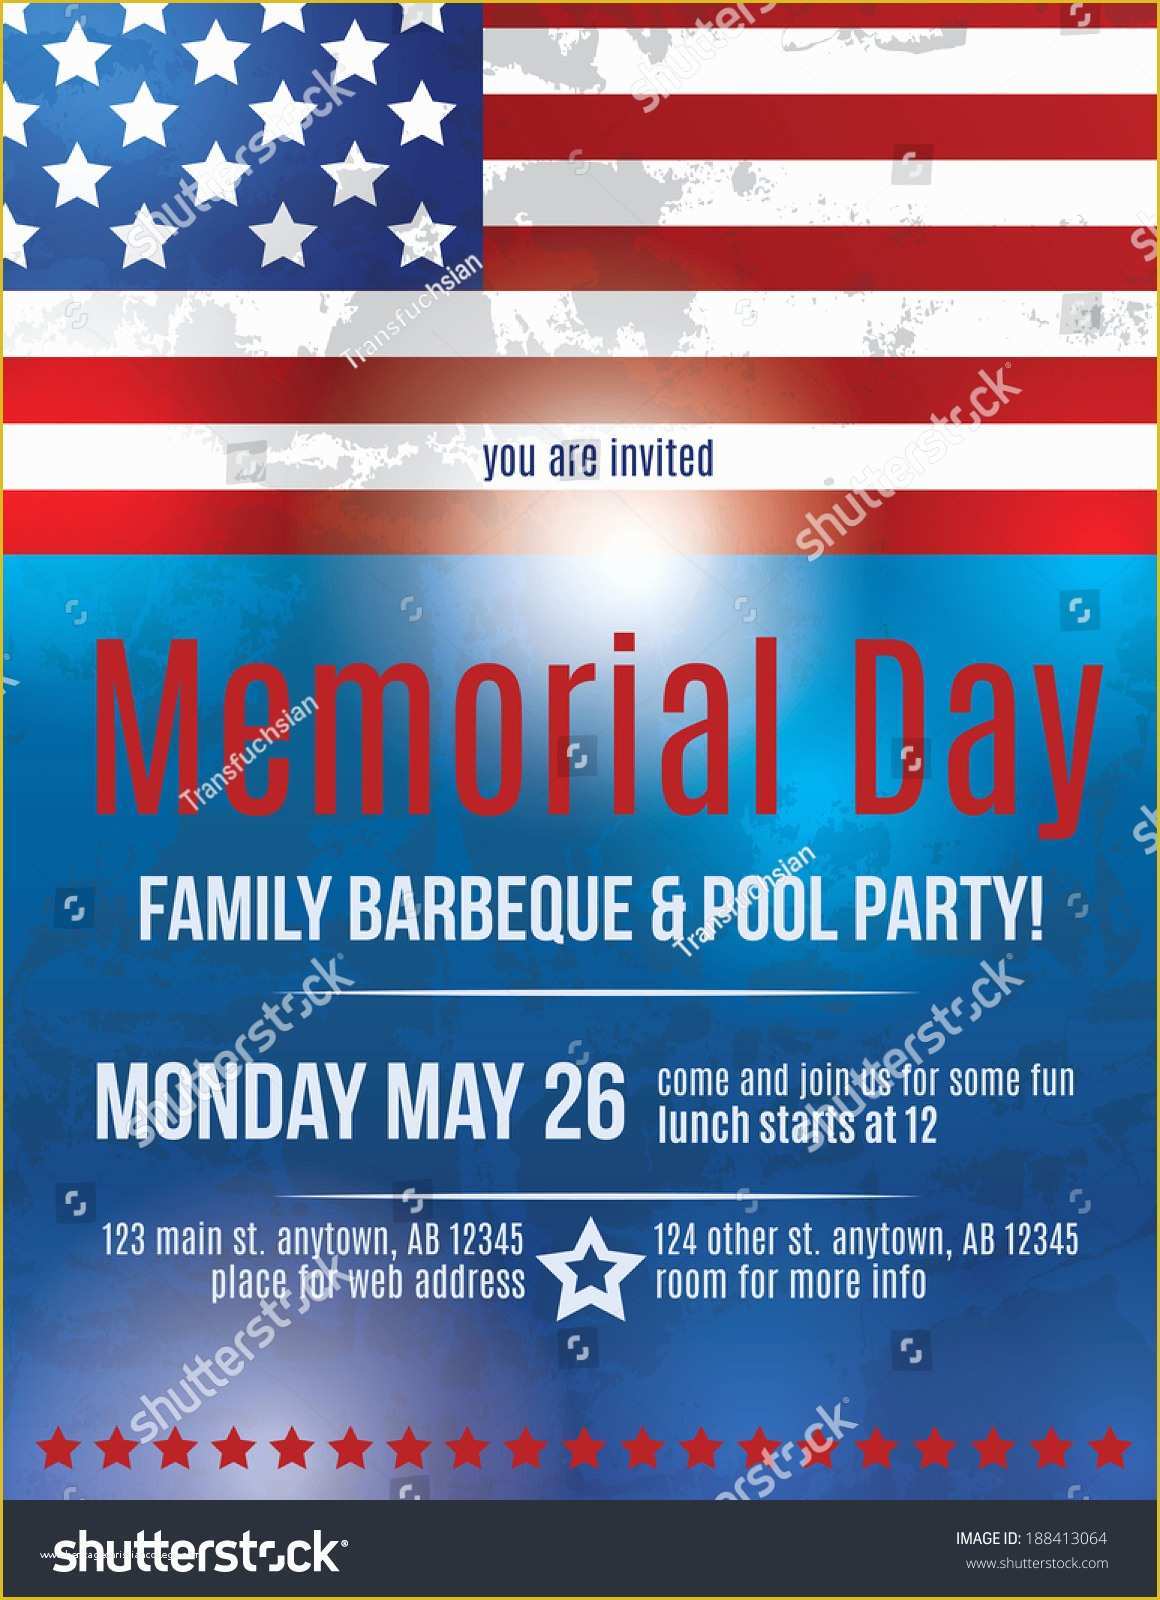 Free American Flag Flyer Template Of Memorial Day Barbeque Flyer Background Template with